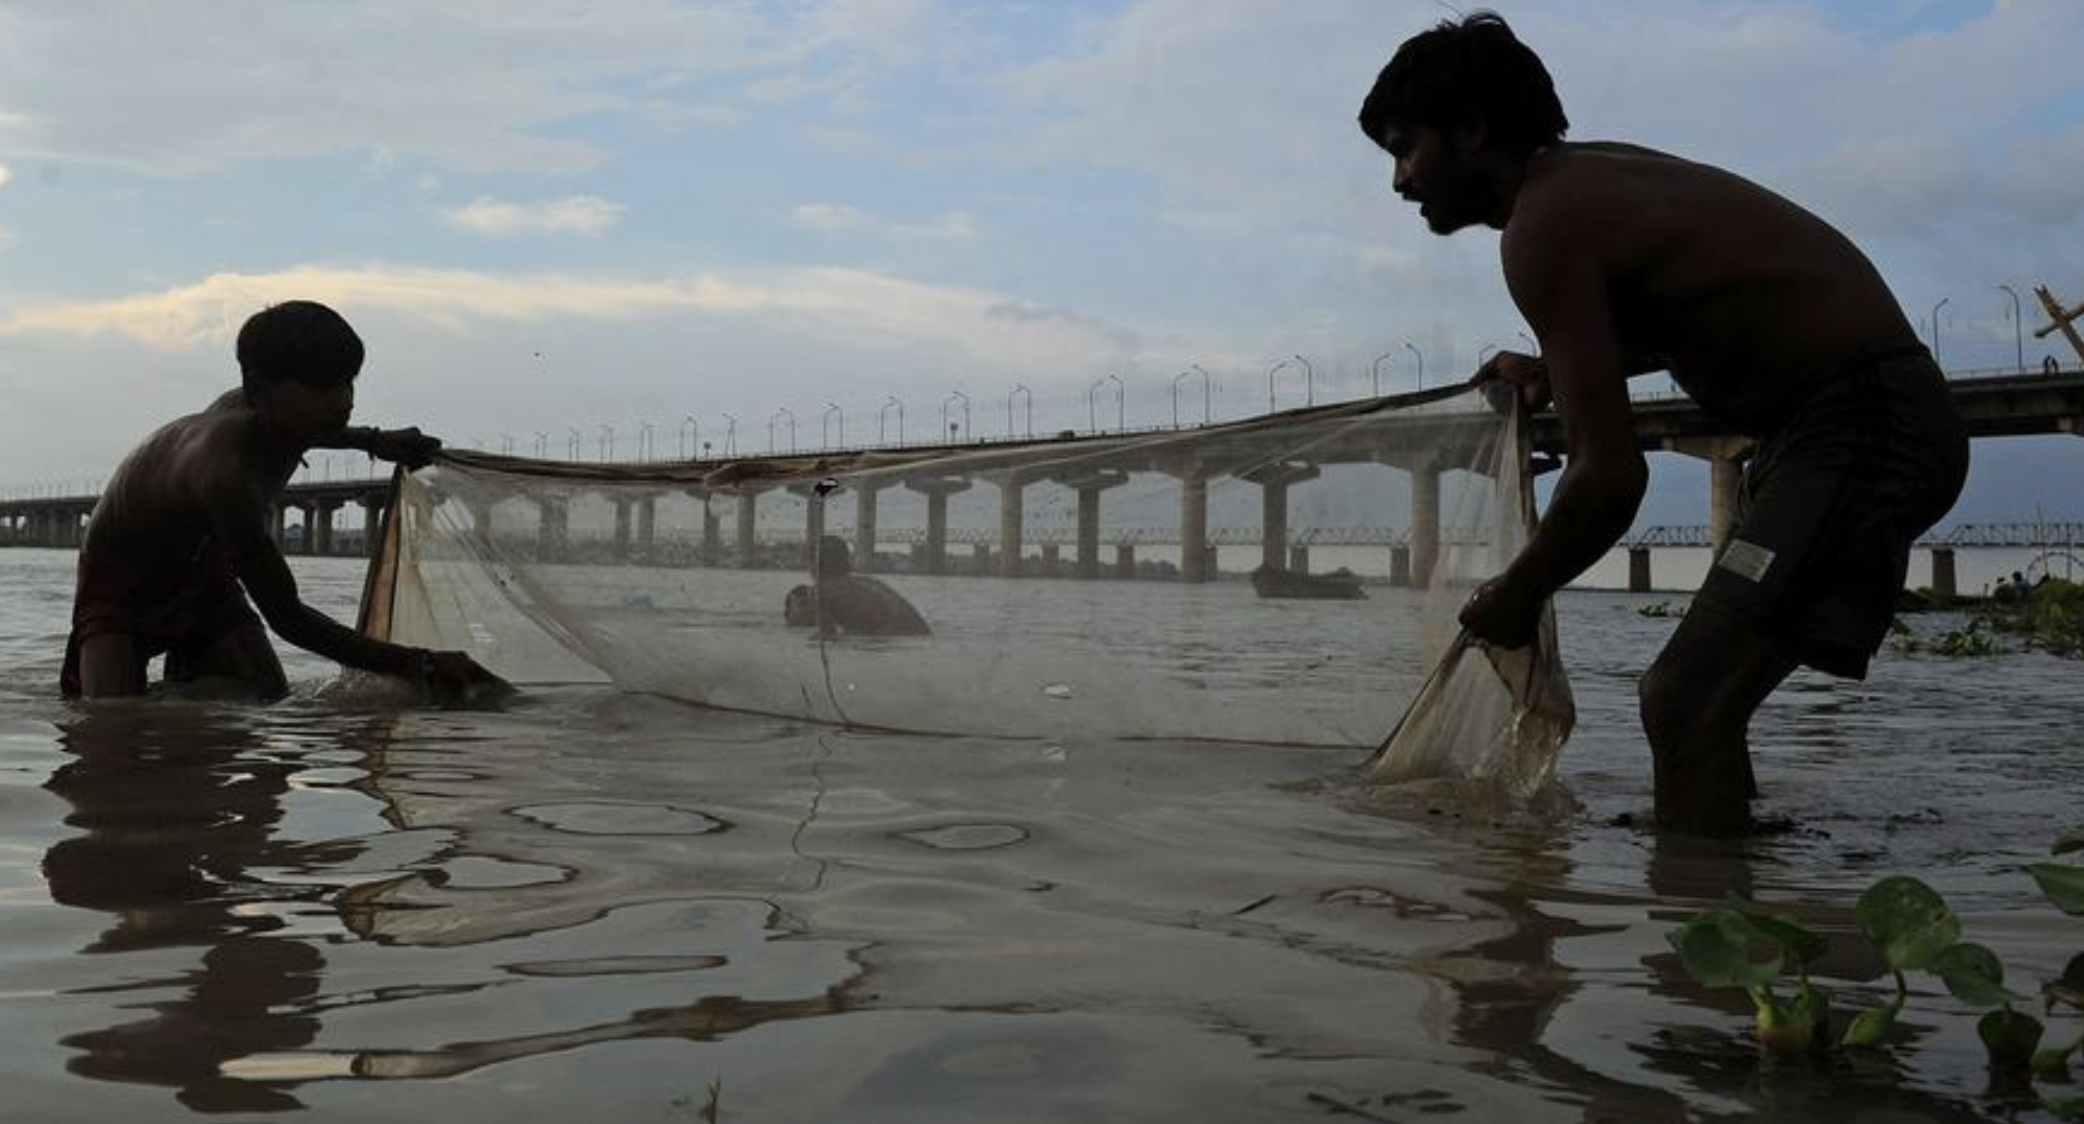 Ganga&rsquo;s lower stretches are in &lsquo;poor&rsquo; or &lsquo;very poor&rsquo; health across all seasons, shows a new studyRapid urbanisation shows cascading ef...